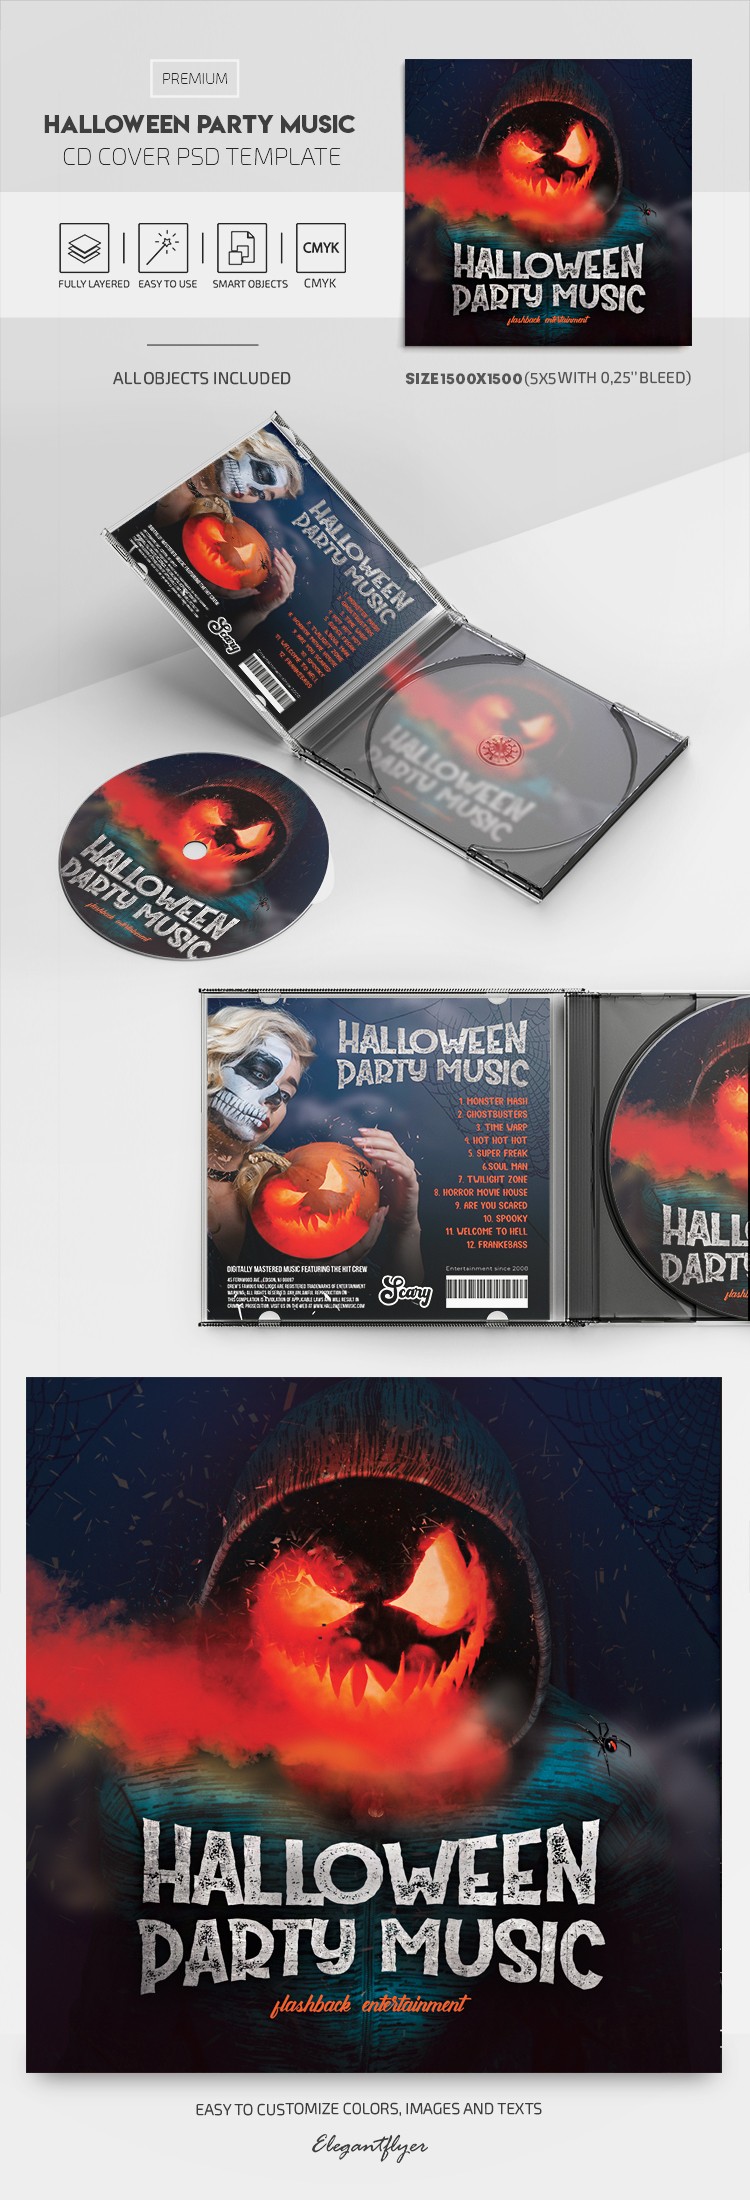 Halloween Party Music CD Cover by ElegantFlyer